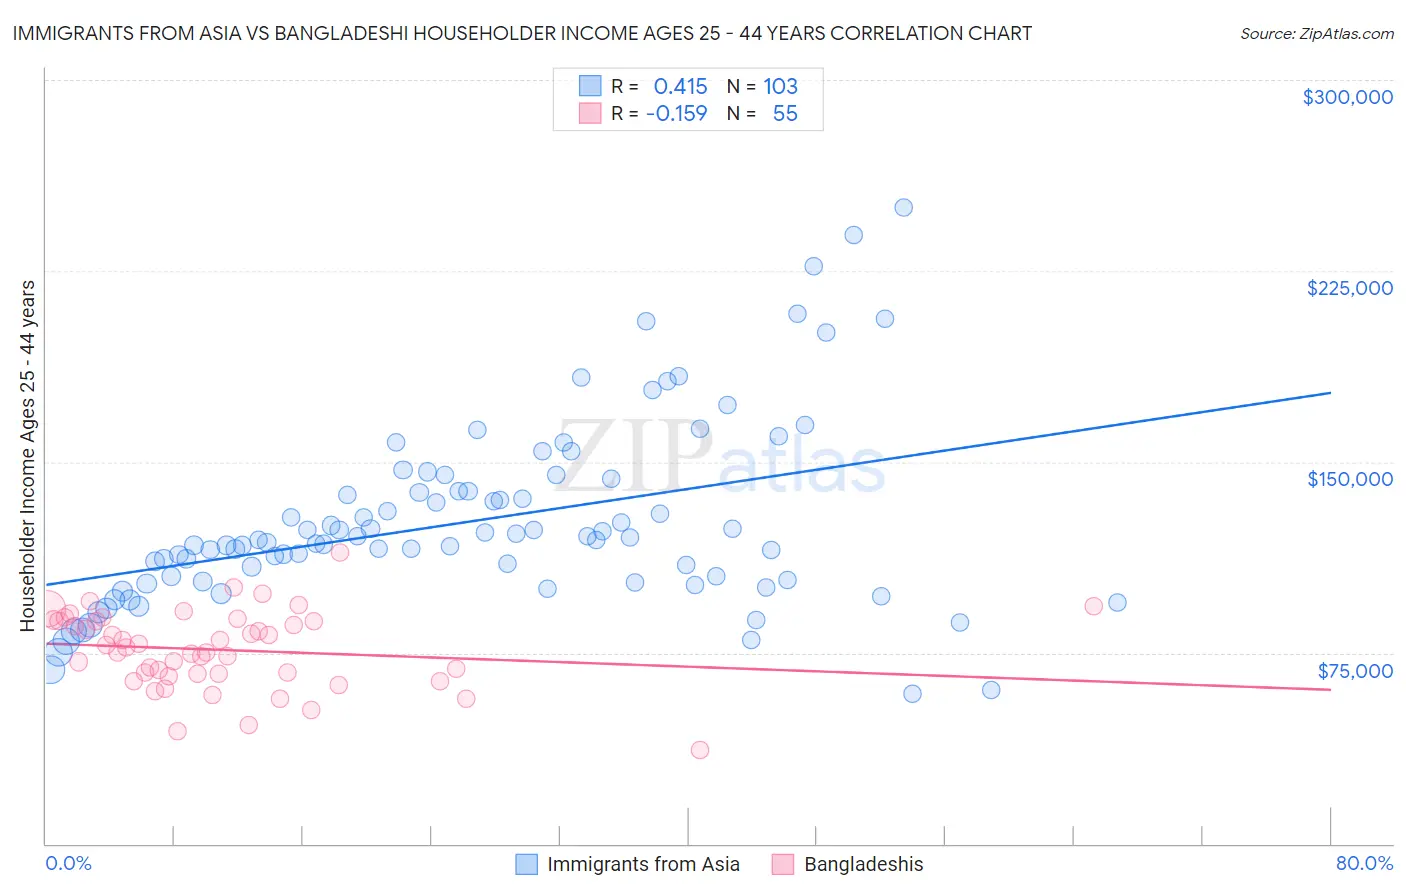 Immigrants from Asia vs Bangladeshi Householder Income Ages 25 - 44 years